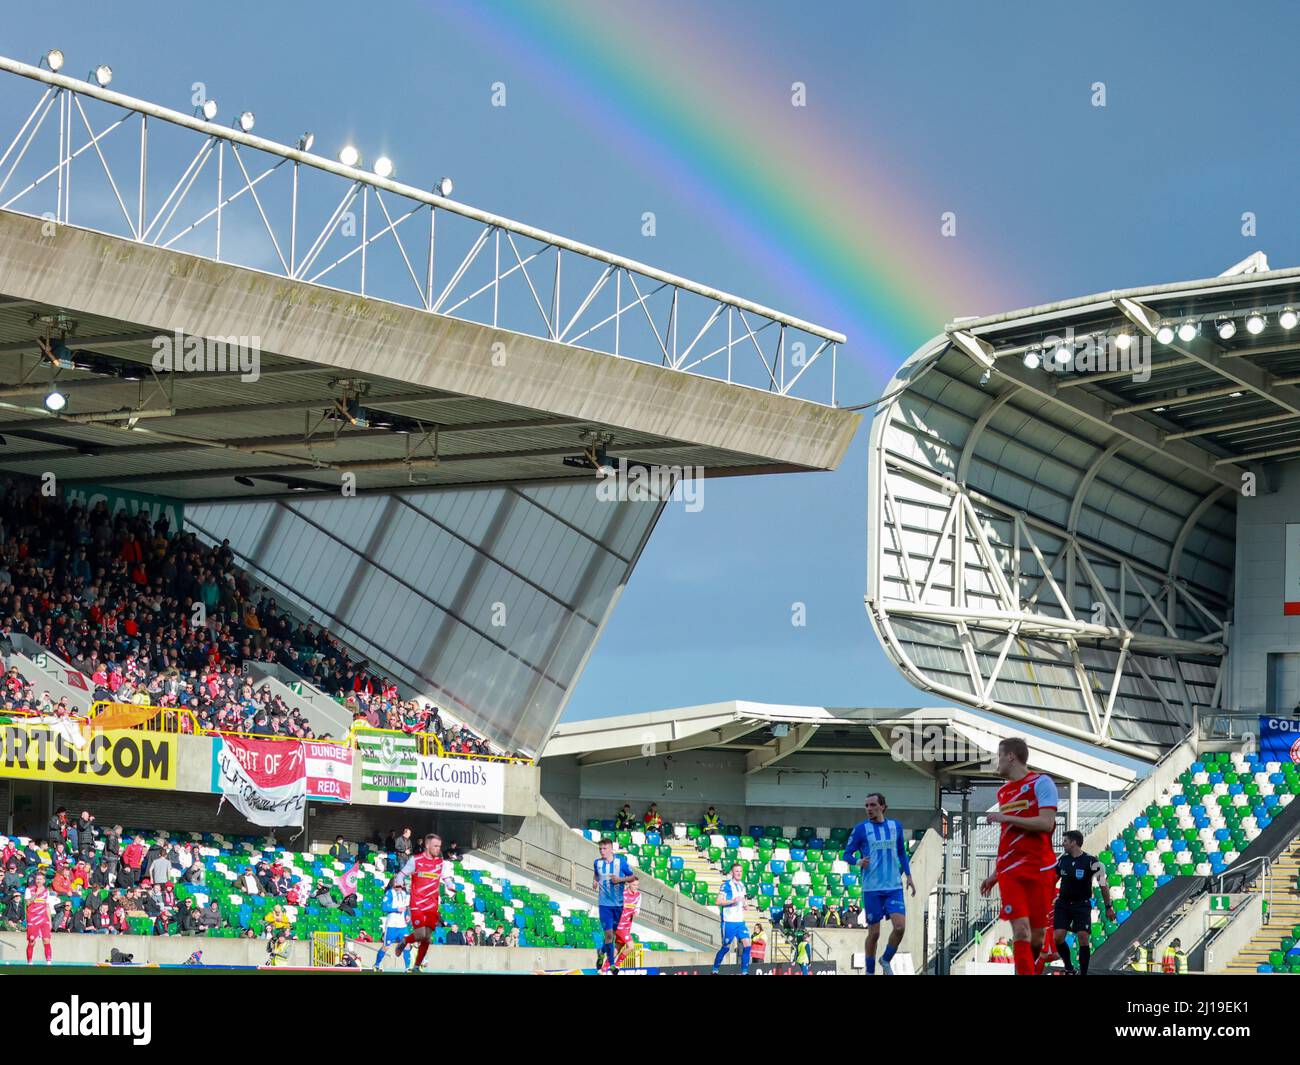 Windsor Park, Belfast, Northern Ireland, UK. 13 Mar 2022. BetMcLean League Cup Final – Cliftonville v Coleraine. Today's game between Cliftonville (red) and Coleraine is the first ever major domestic cup football final to be played on a Sunday in Northern Ireland. A rainbow over the cup final at Windsor Park Belfast.. Credit: CAZIMB/Alamy Live News. Stock Photo